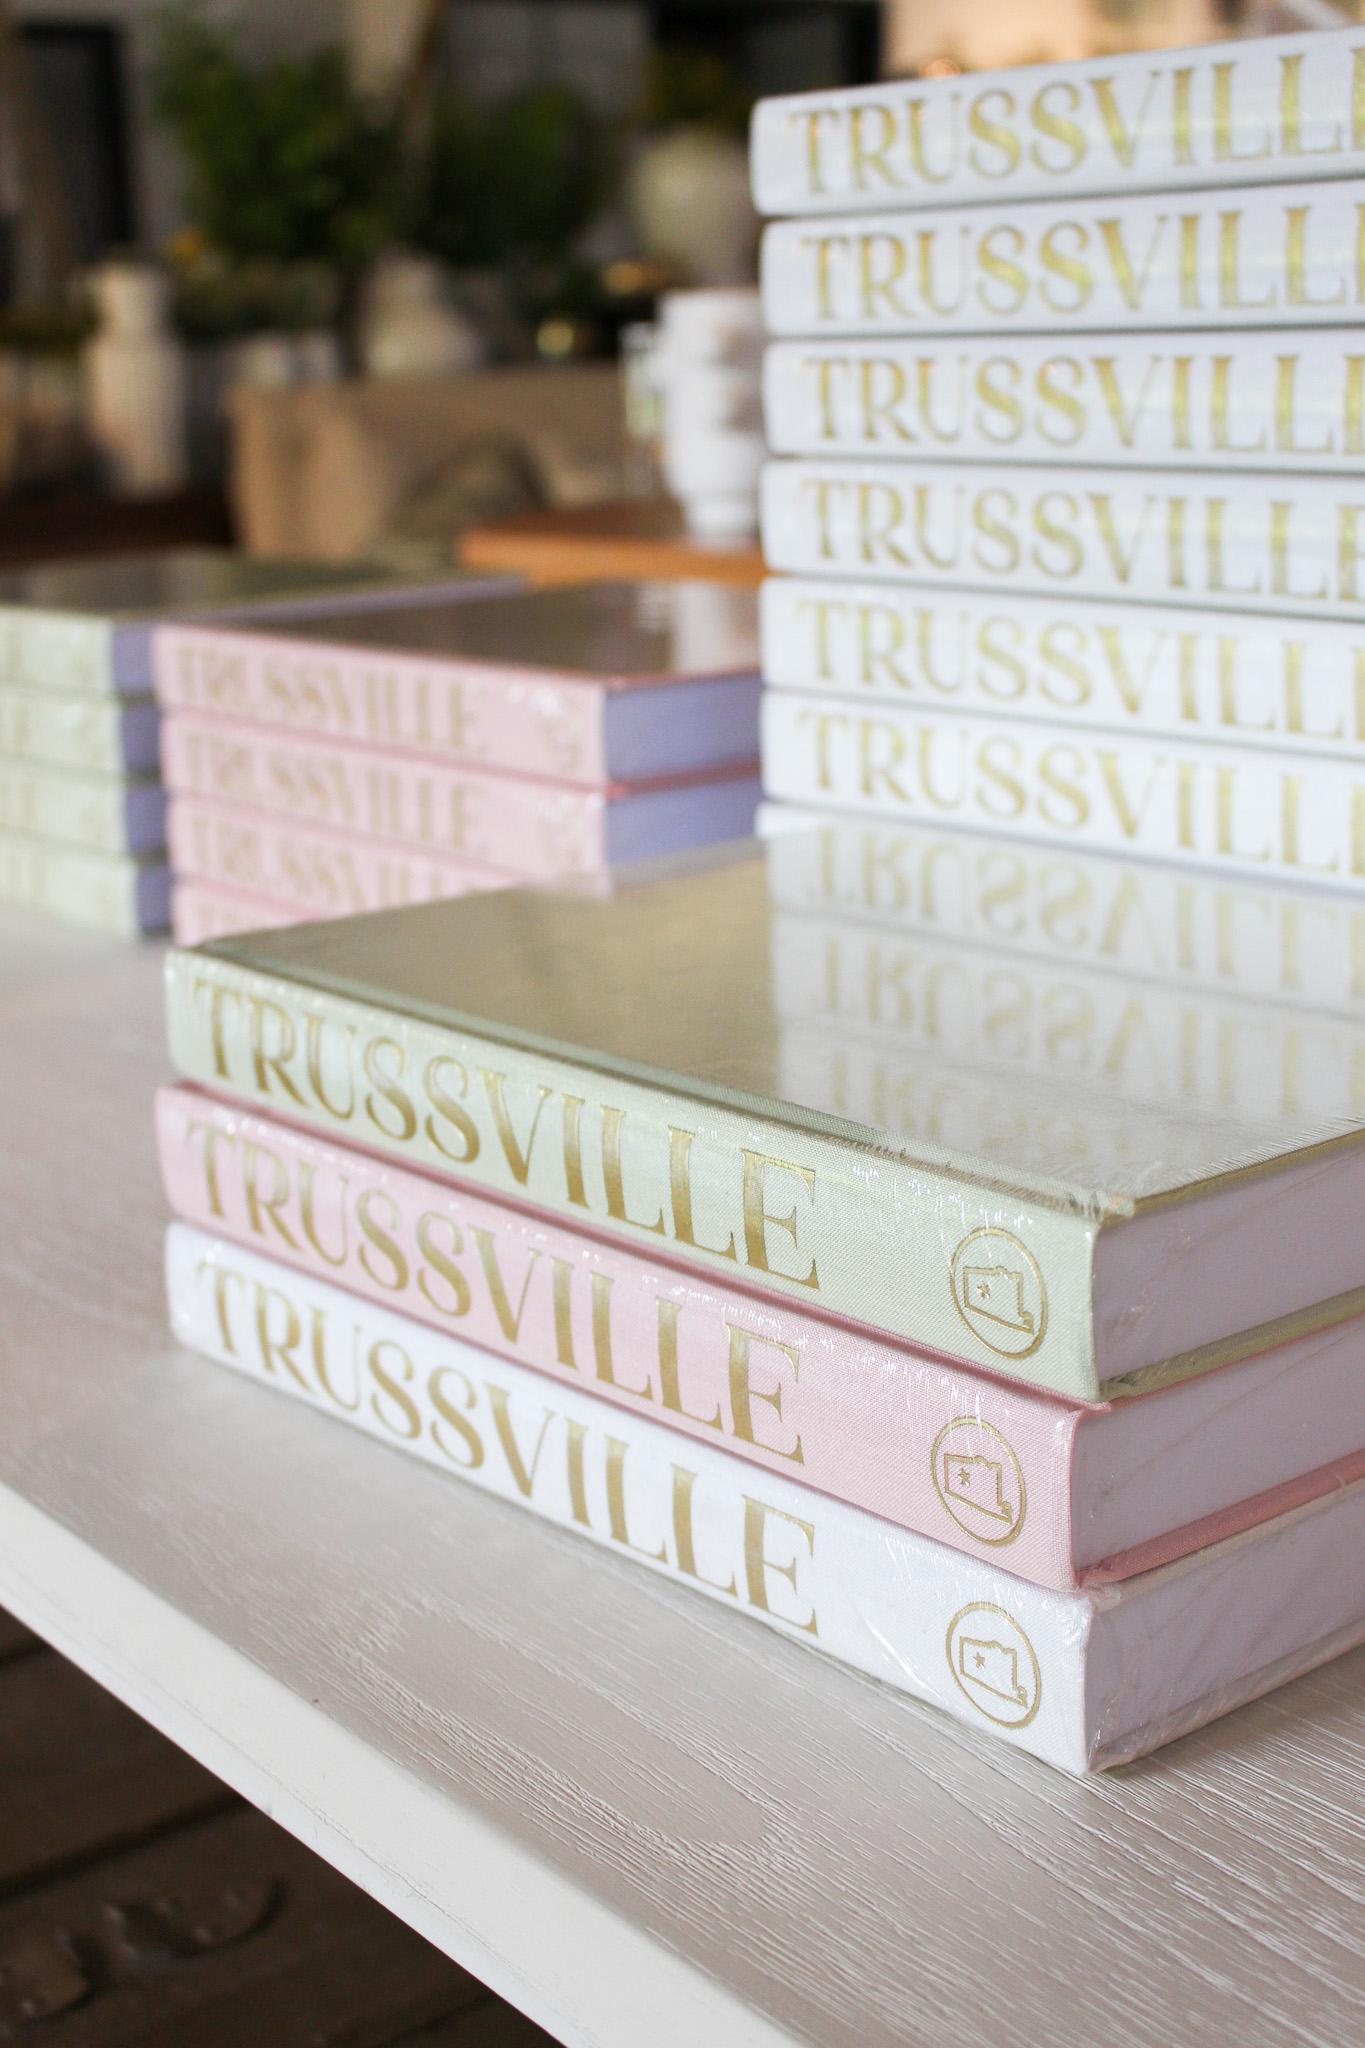 Trussville Coffee Table Book – Nona Ruth's